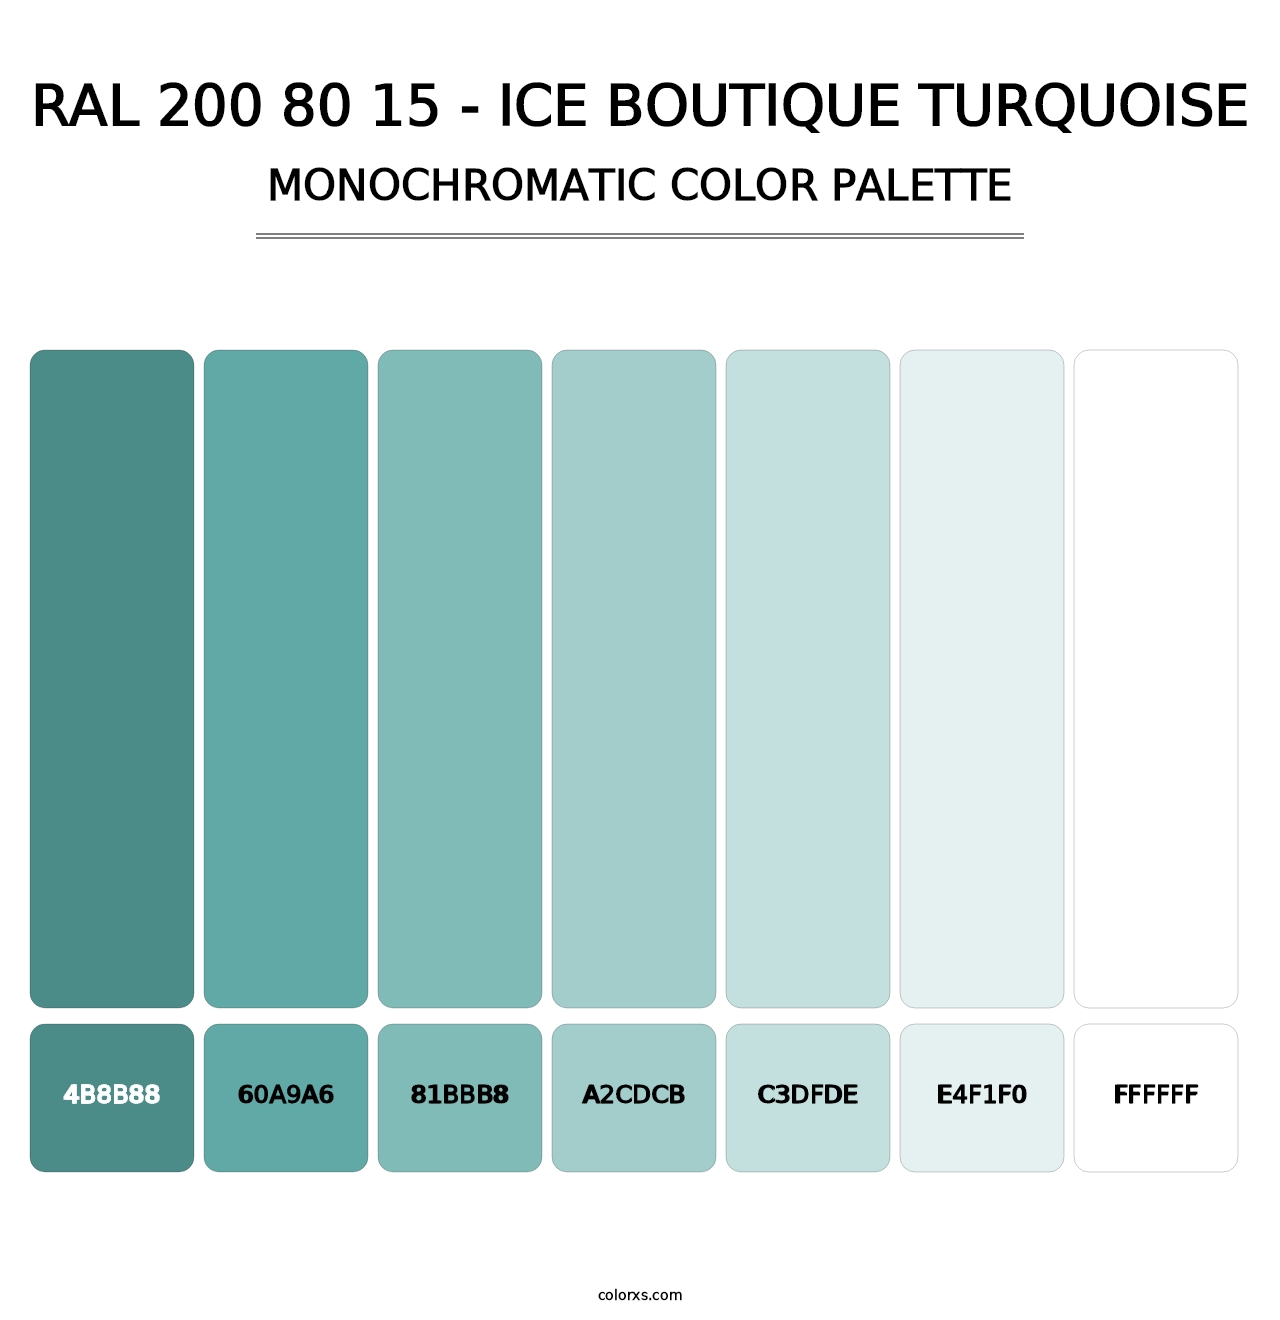 RAL 200 80 15 - Ice Boutique Turquoise - Monochromatic Color Palette